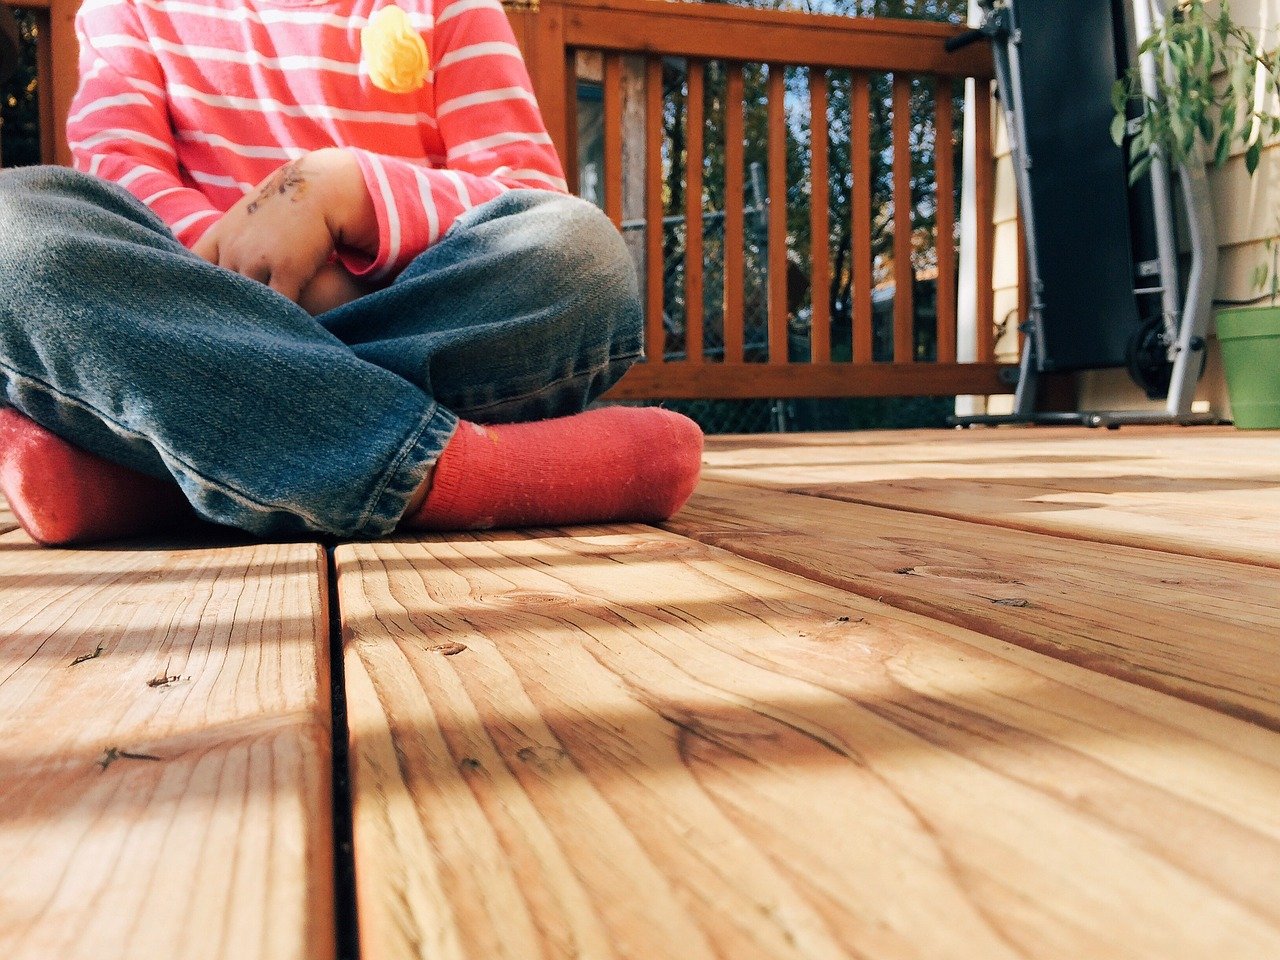 Small child in red shirt sitting on sunny deck